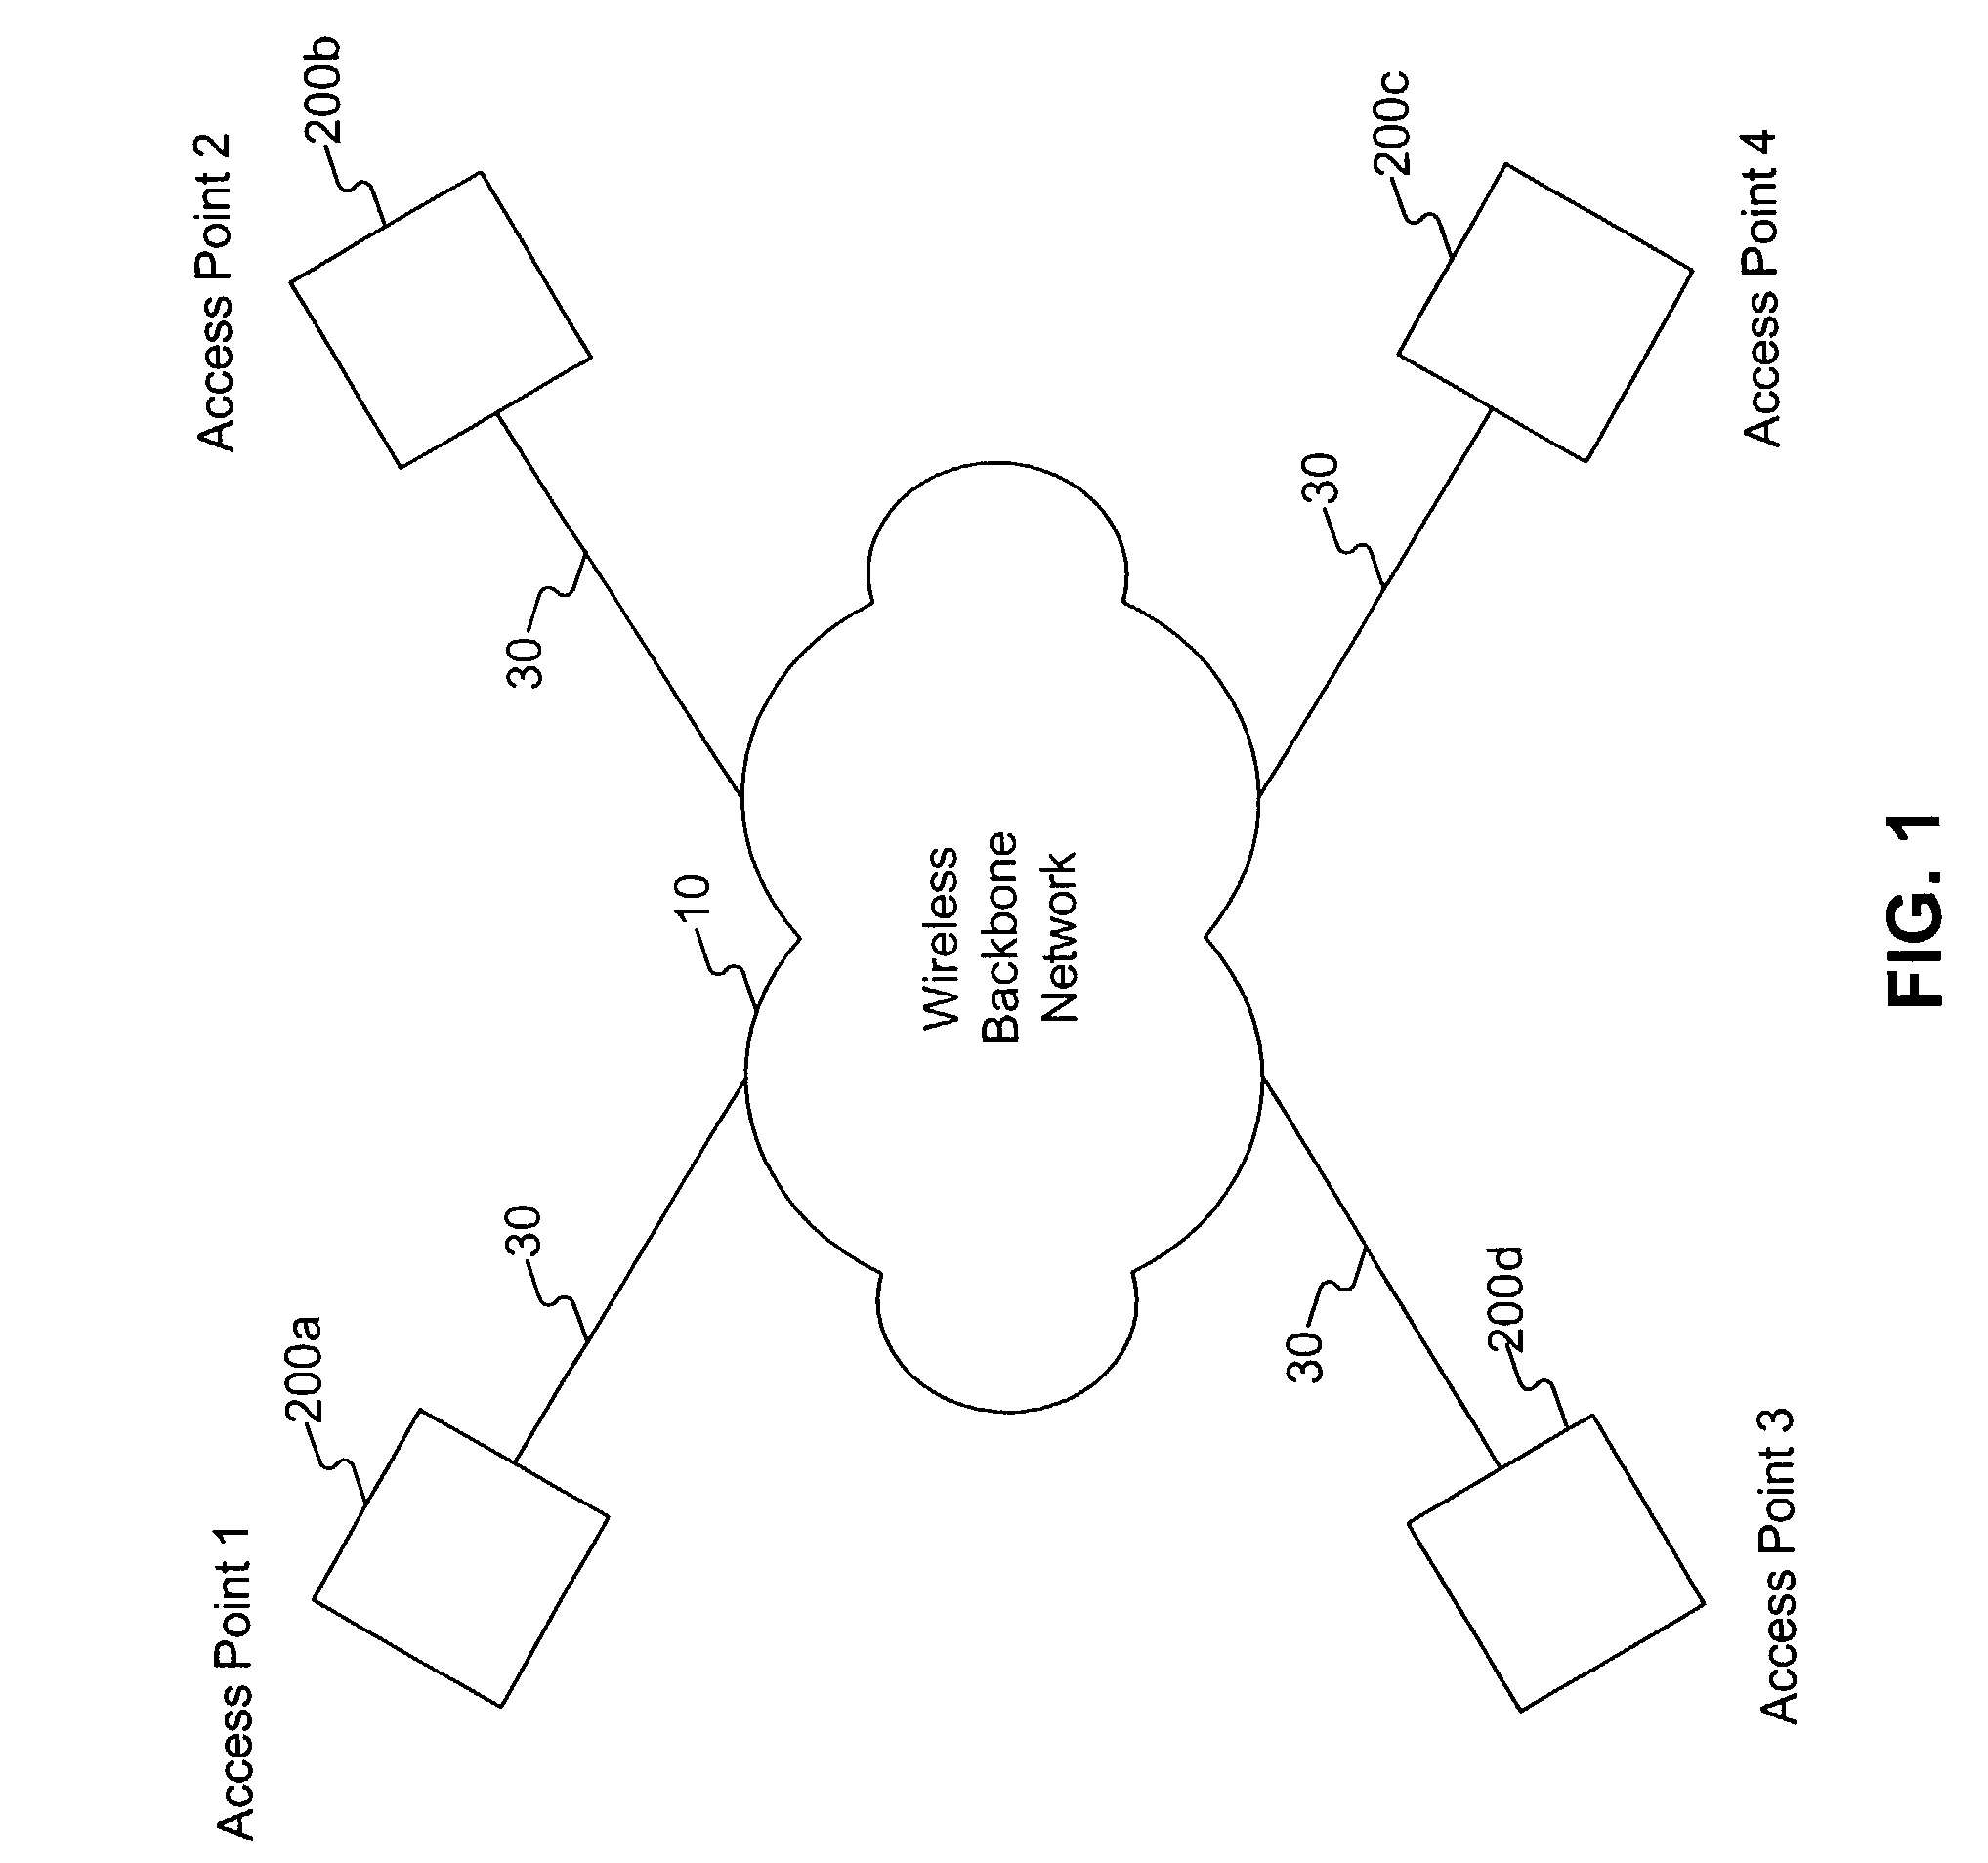 System and method for reducing broadcast traffic wireless access-point networks